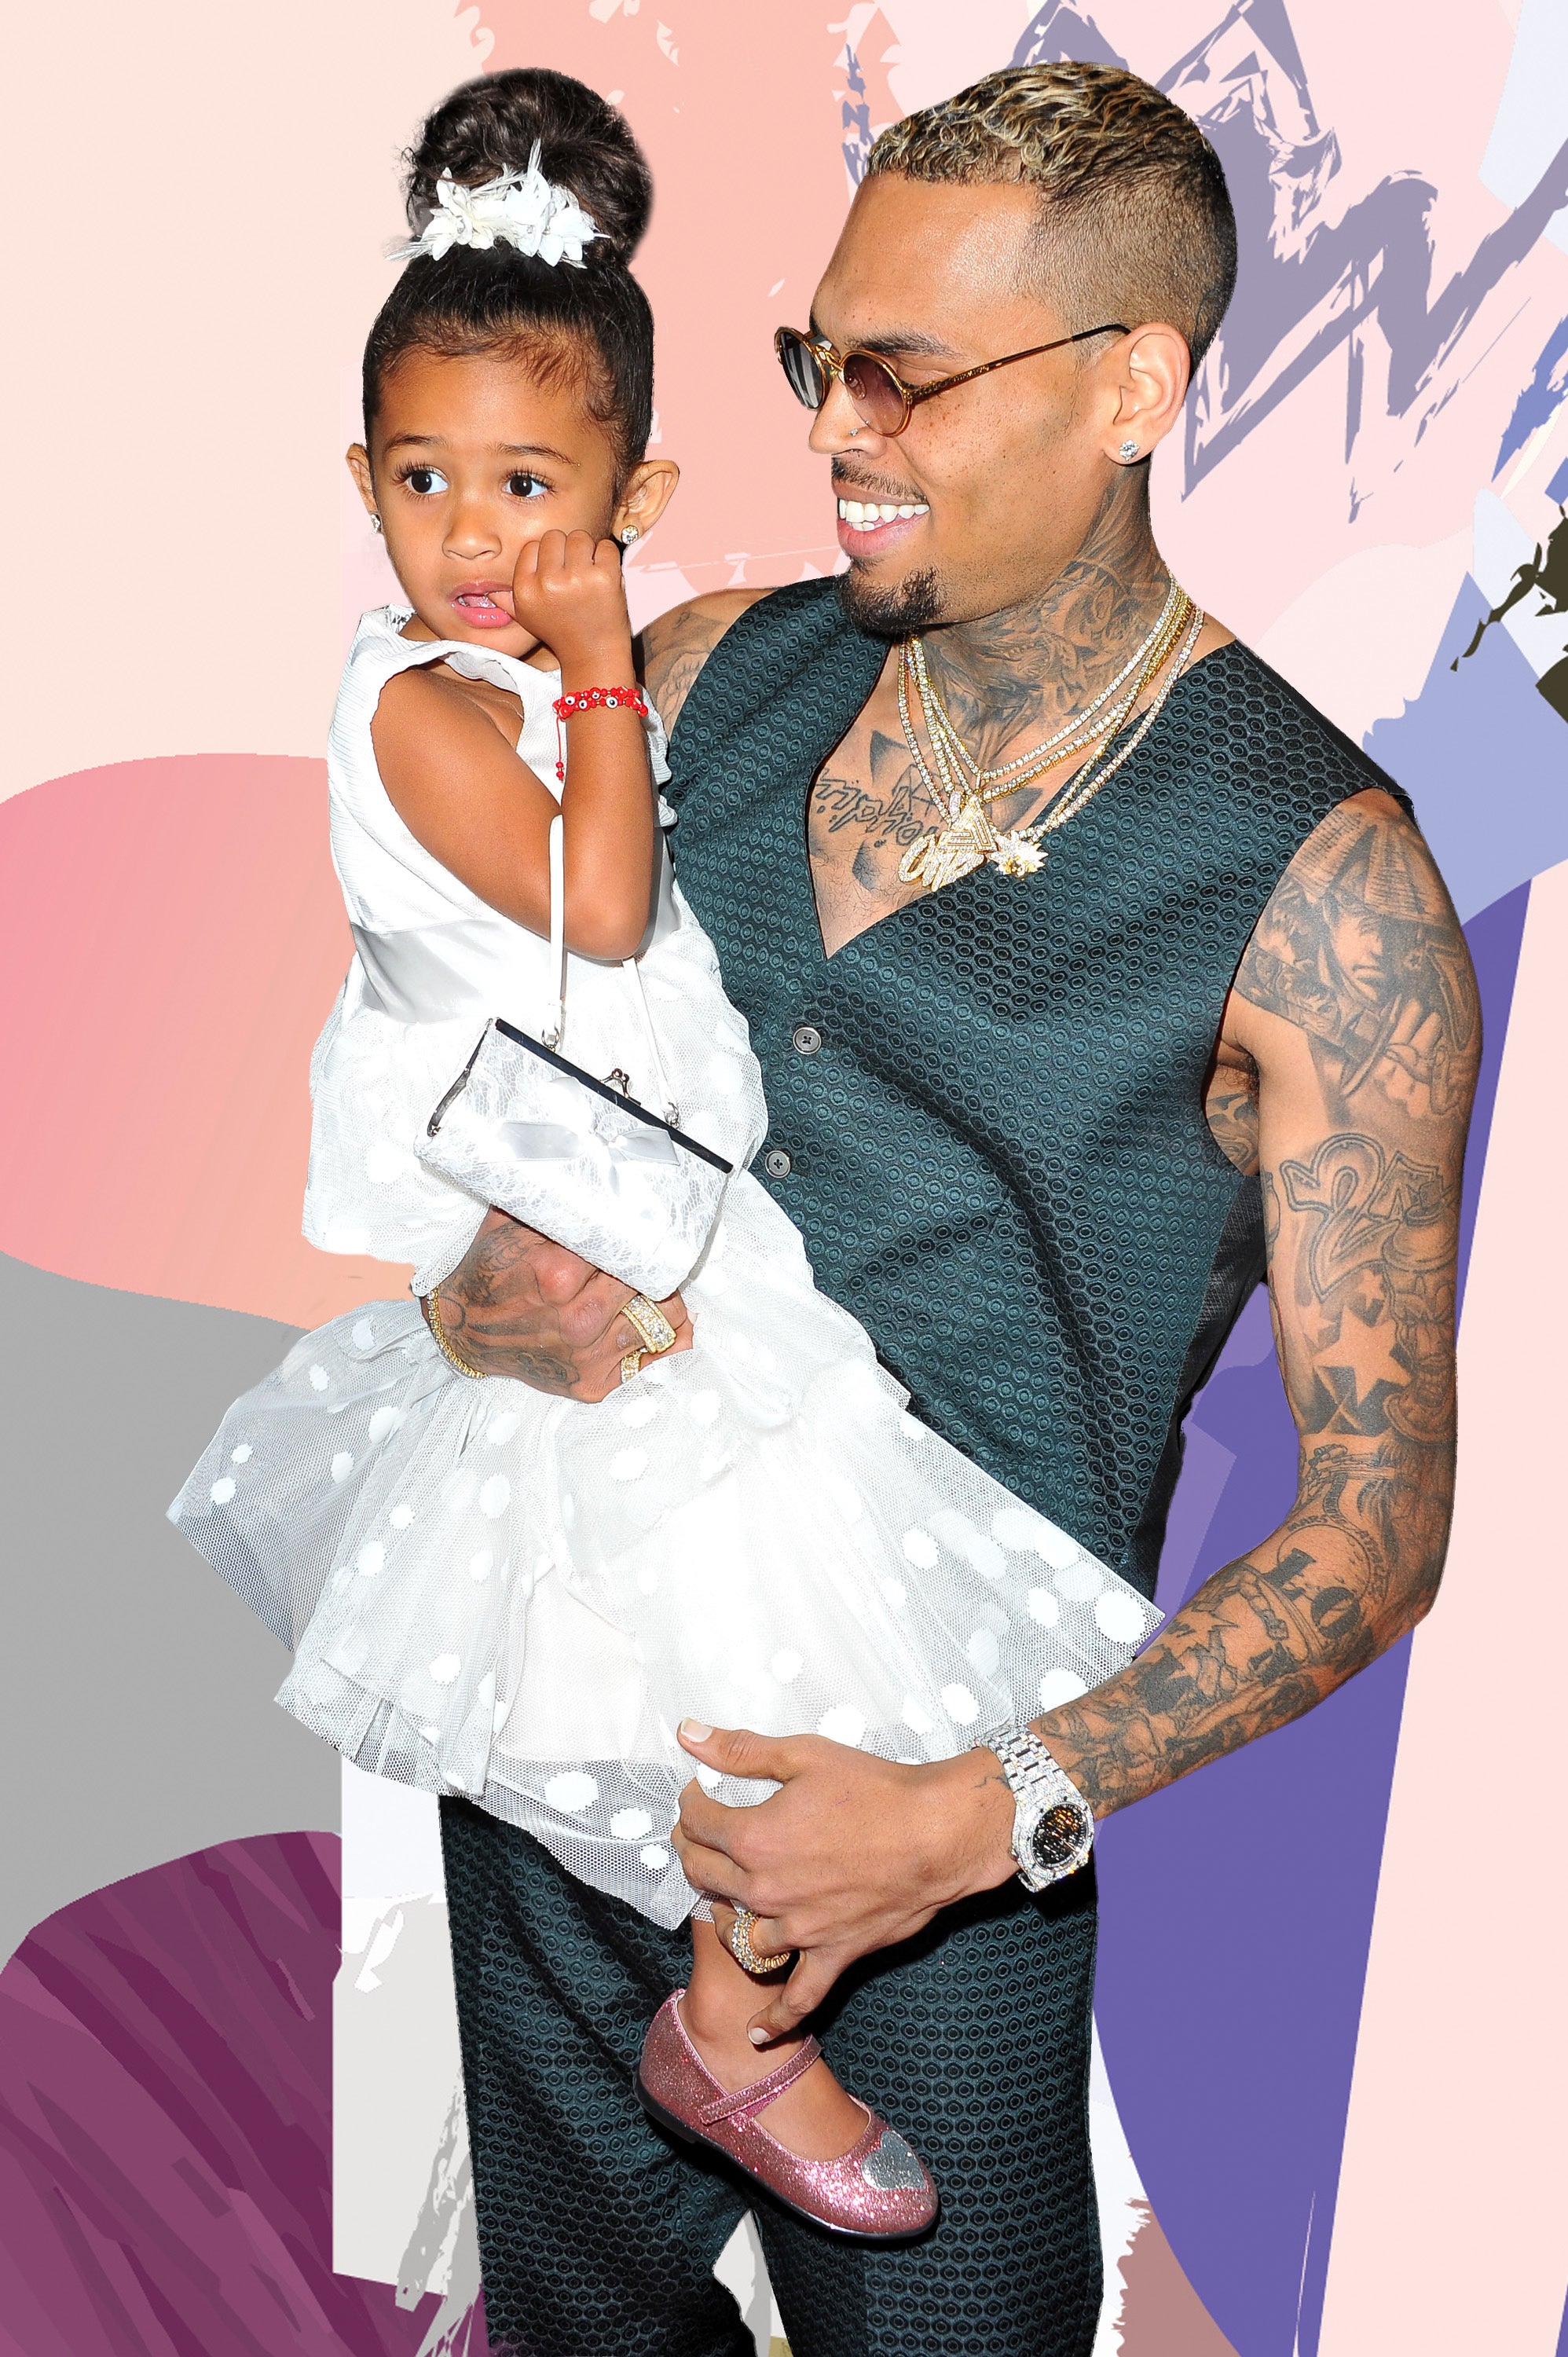 Chris Brown's Adorable 3-Year-Old Daughter Now Has Her Own Kid's Clothing & Cosmetics Line
